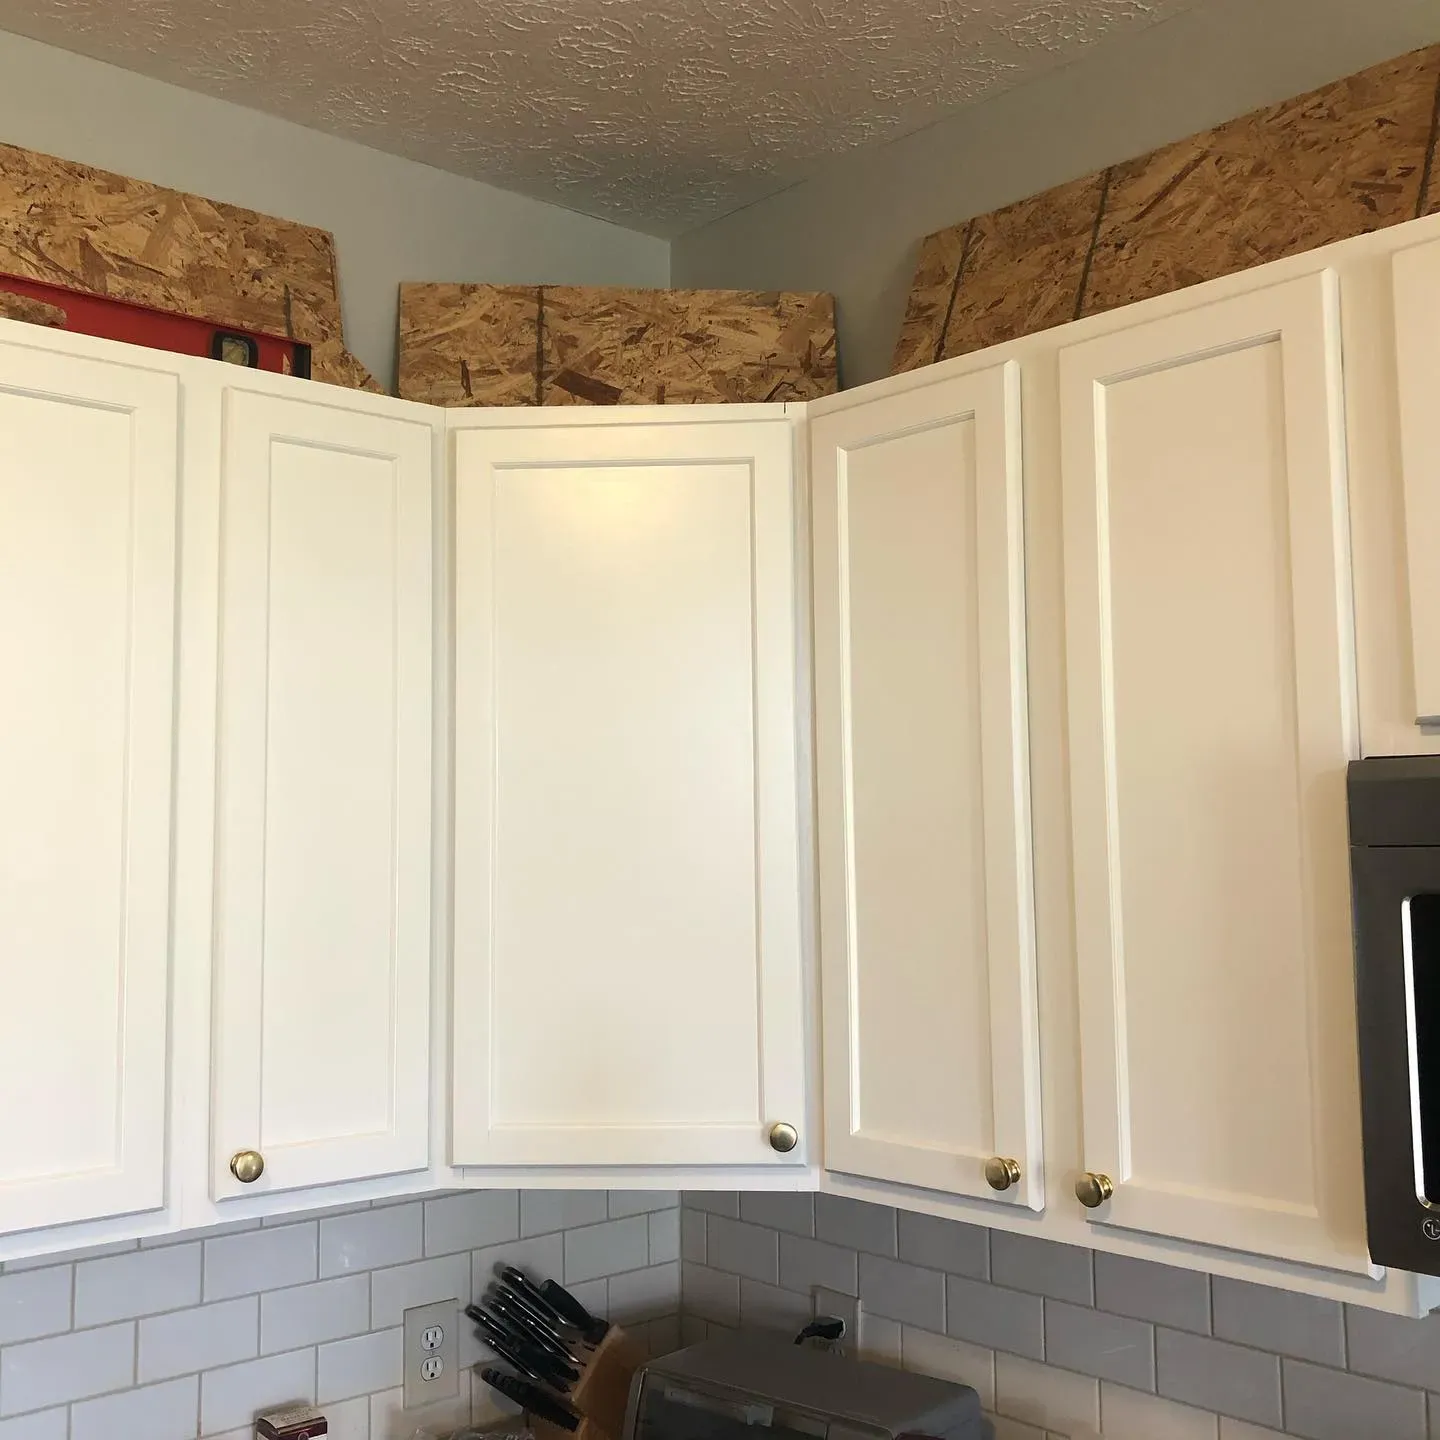 SW 7103 kitchen cabinets color